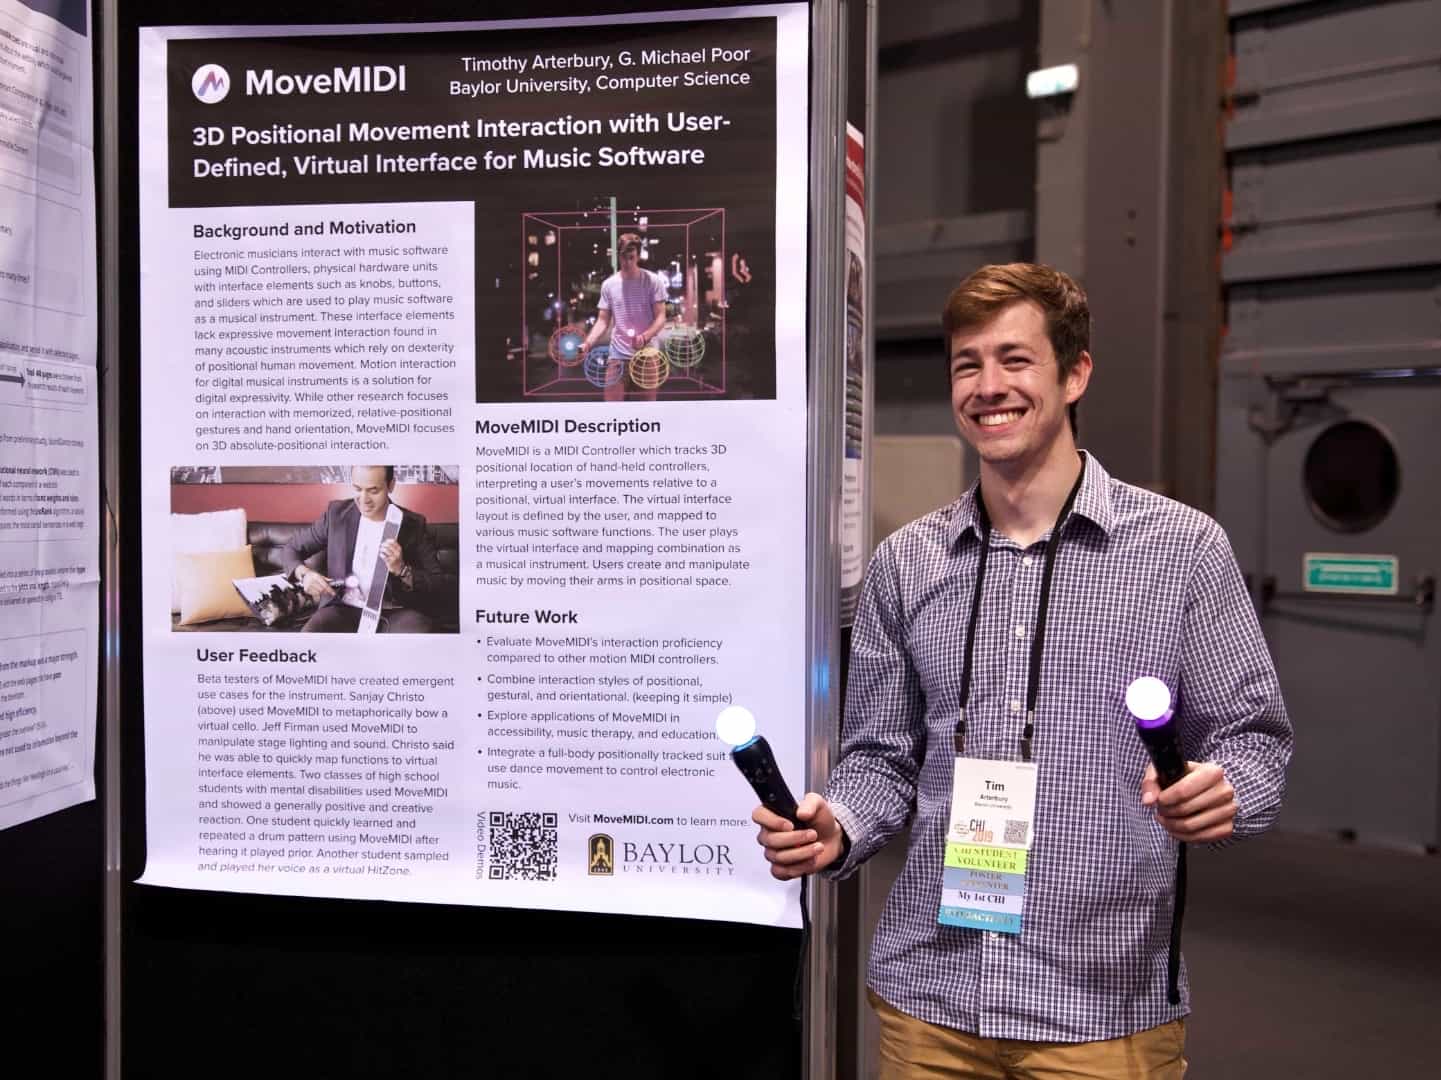 Photo of Tim standing in front of his research poster.